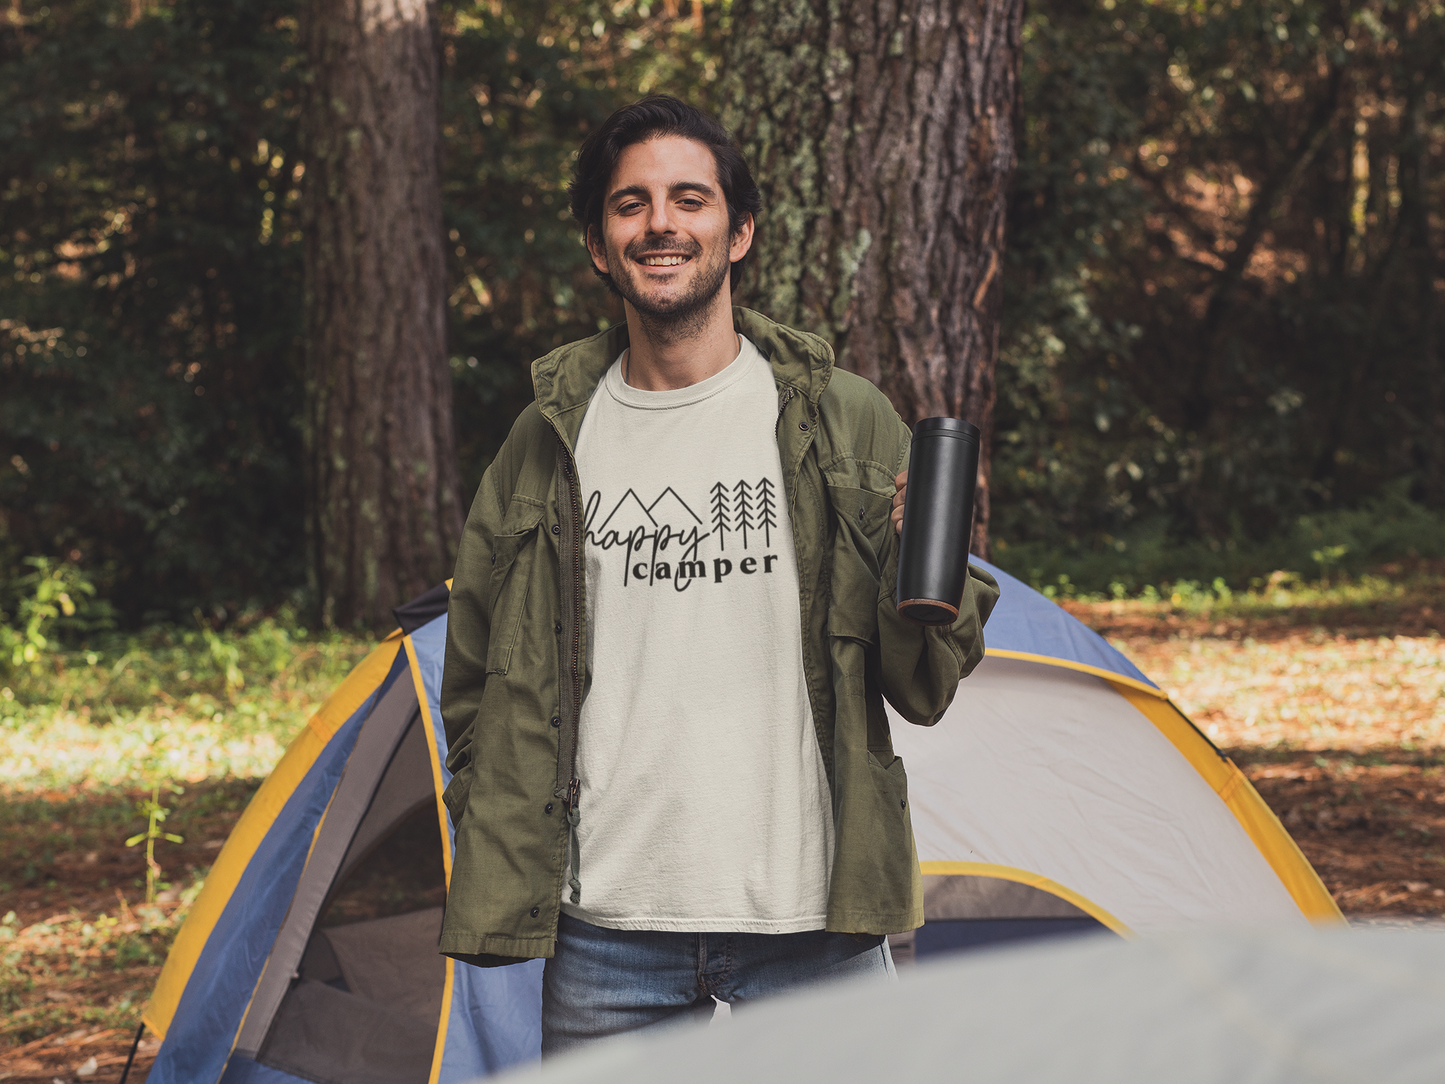 Happy Camper T-Shirt in Heather Oatmeal. The front has a cursive font "happy" with "camper" below it in a bold lowercase font. Two triangle mountains are above the word happy, and three pine trees are above the word camper. The design is in black. This is the front view of the shirt on a male model with a green jacket on holding up a mug and smiling in a woodsy scene with a camping tent behind him.